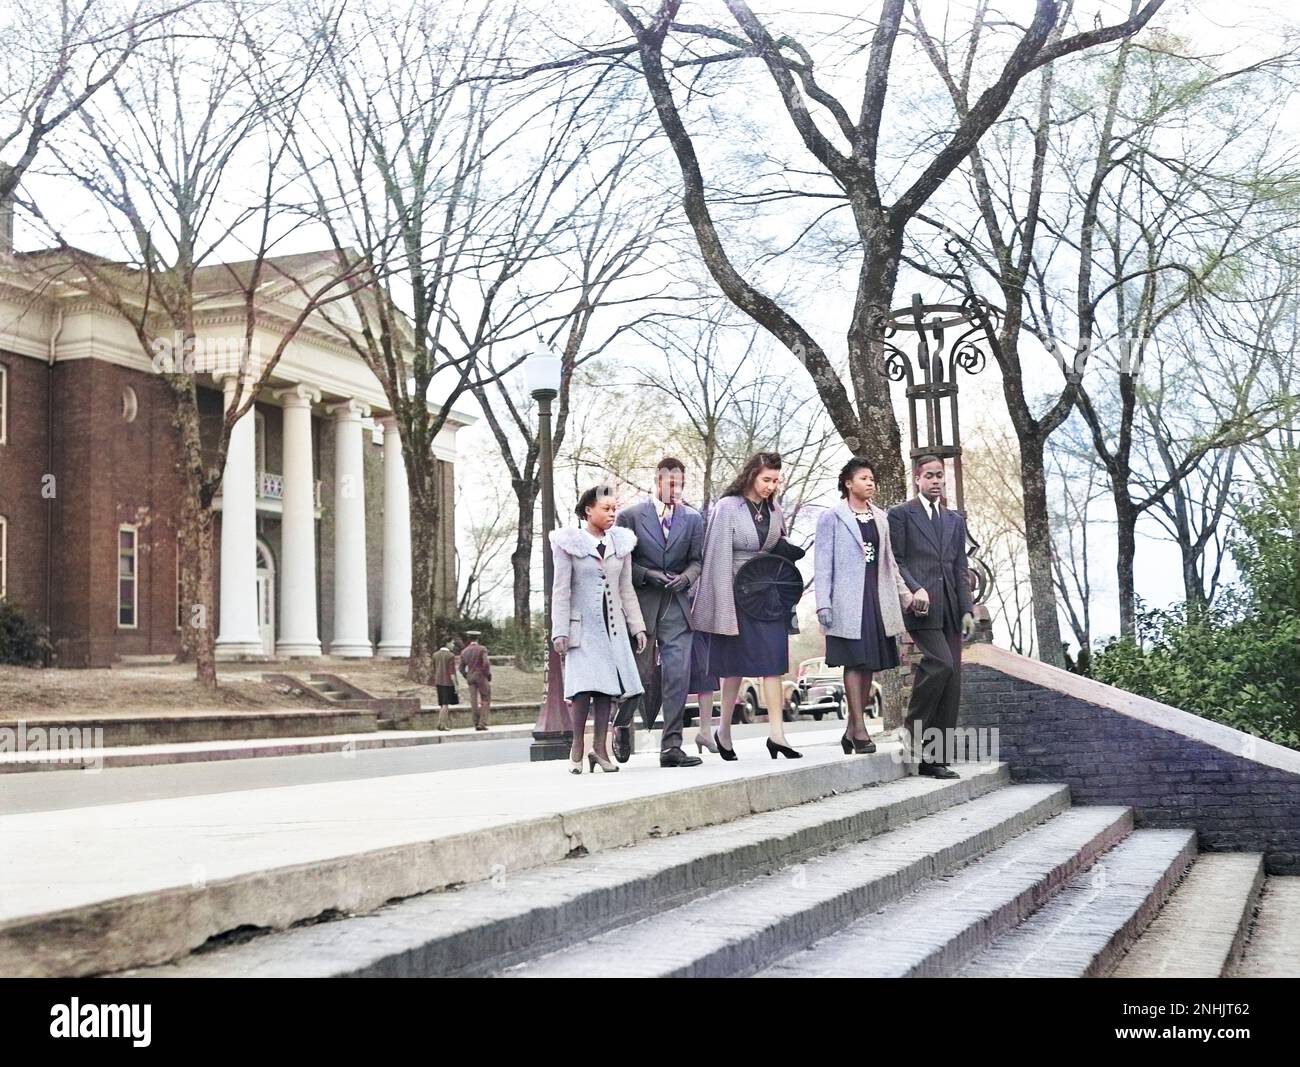 Students on Campus, Tuskegee Institute, Tuskegee, Alabama, USA, Arthur Rothstein, U.S. Office of War Information, March 1942 Stock Photo